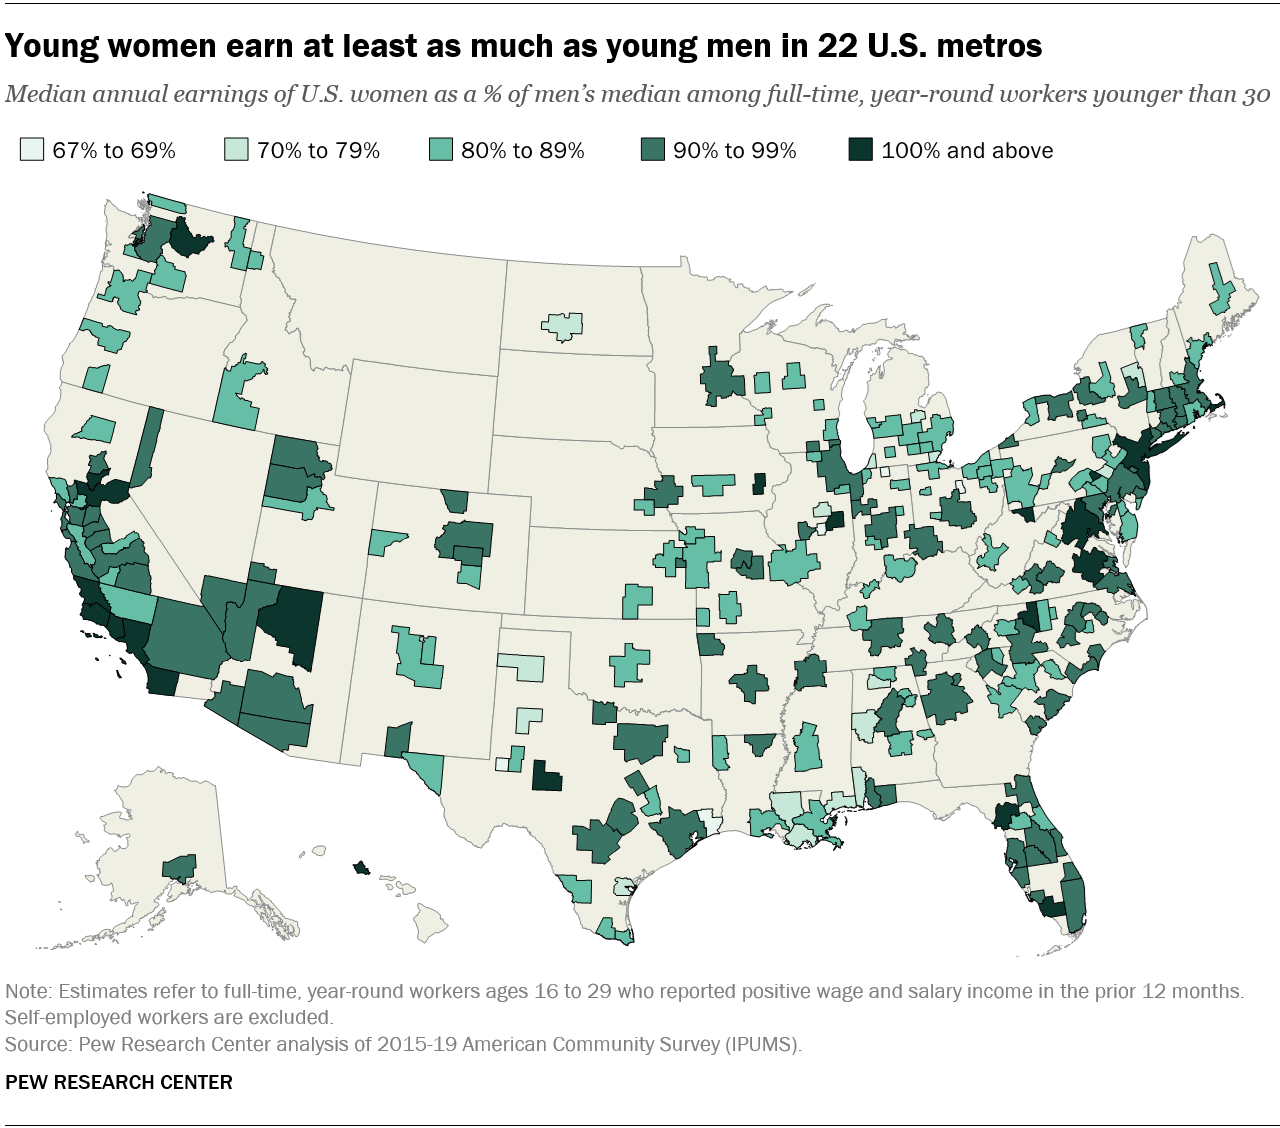 map of U.S. where young women earn as much or more than men